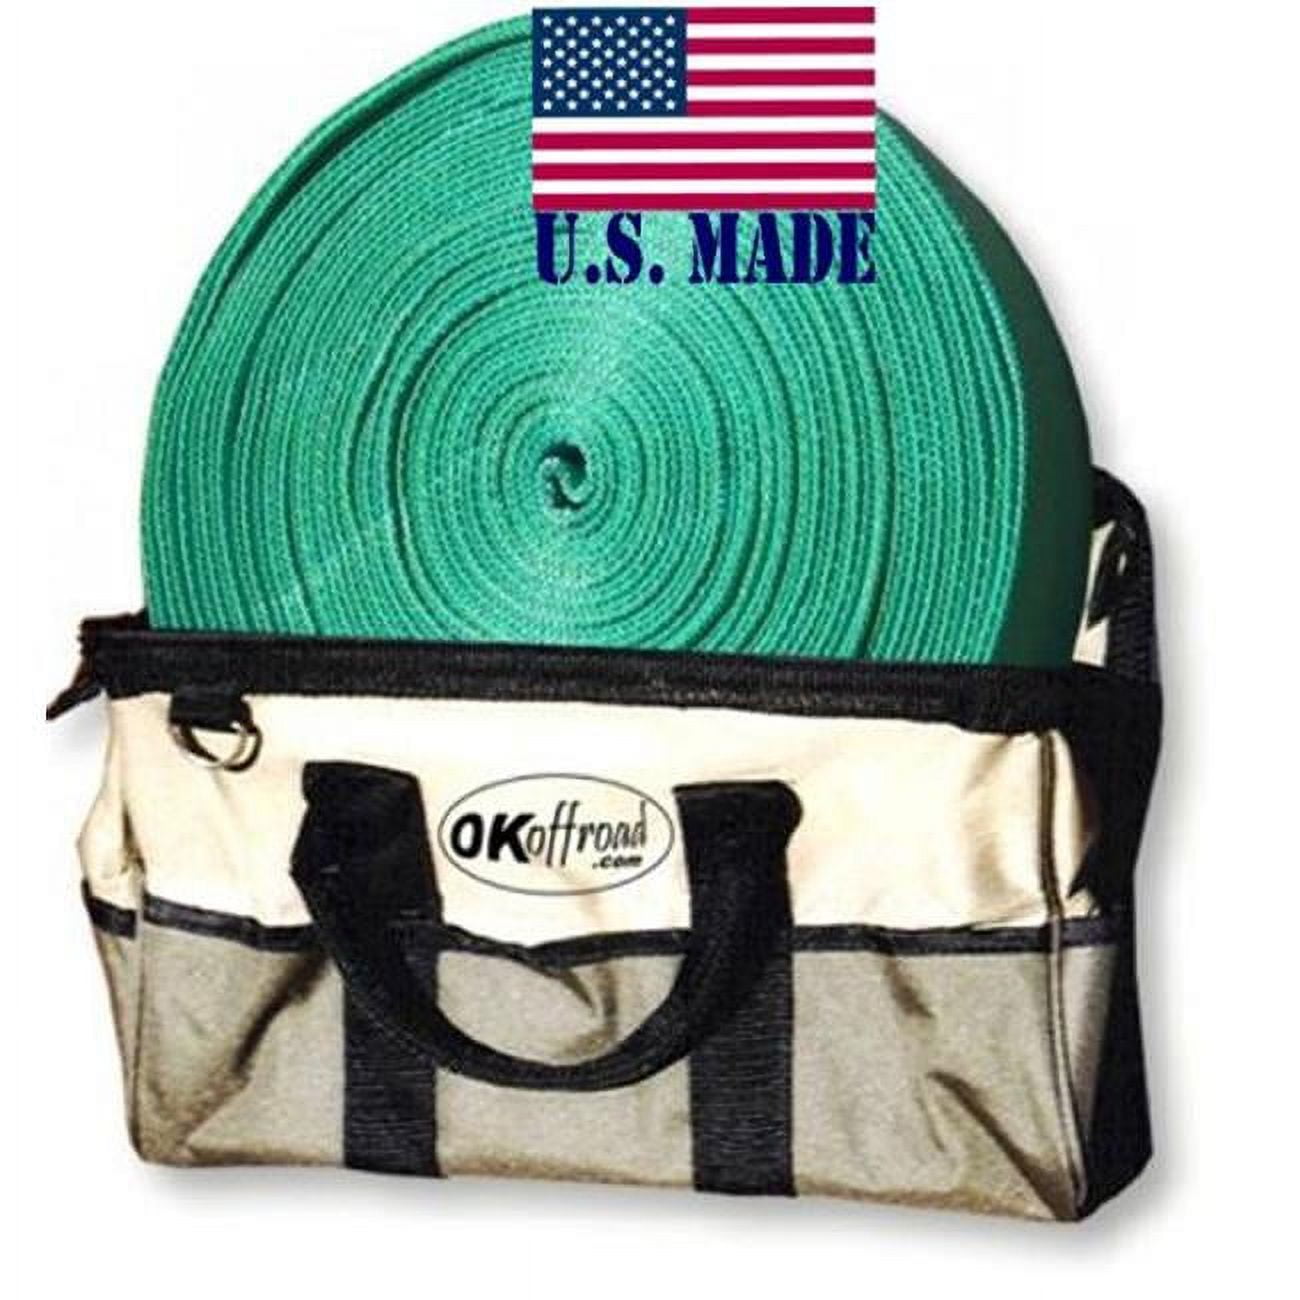 U.s. Made Xd Snatch Strap (4 Inch X 30 Ft) W/ Hd Carry Bag (off-road Recovery)